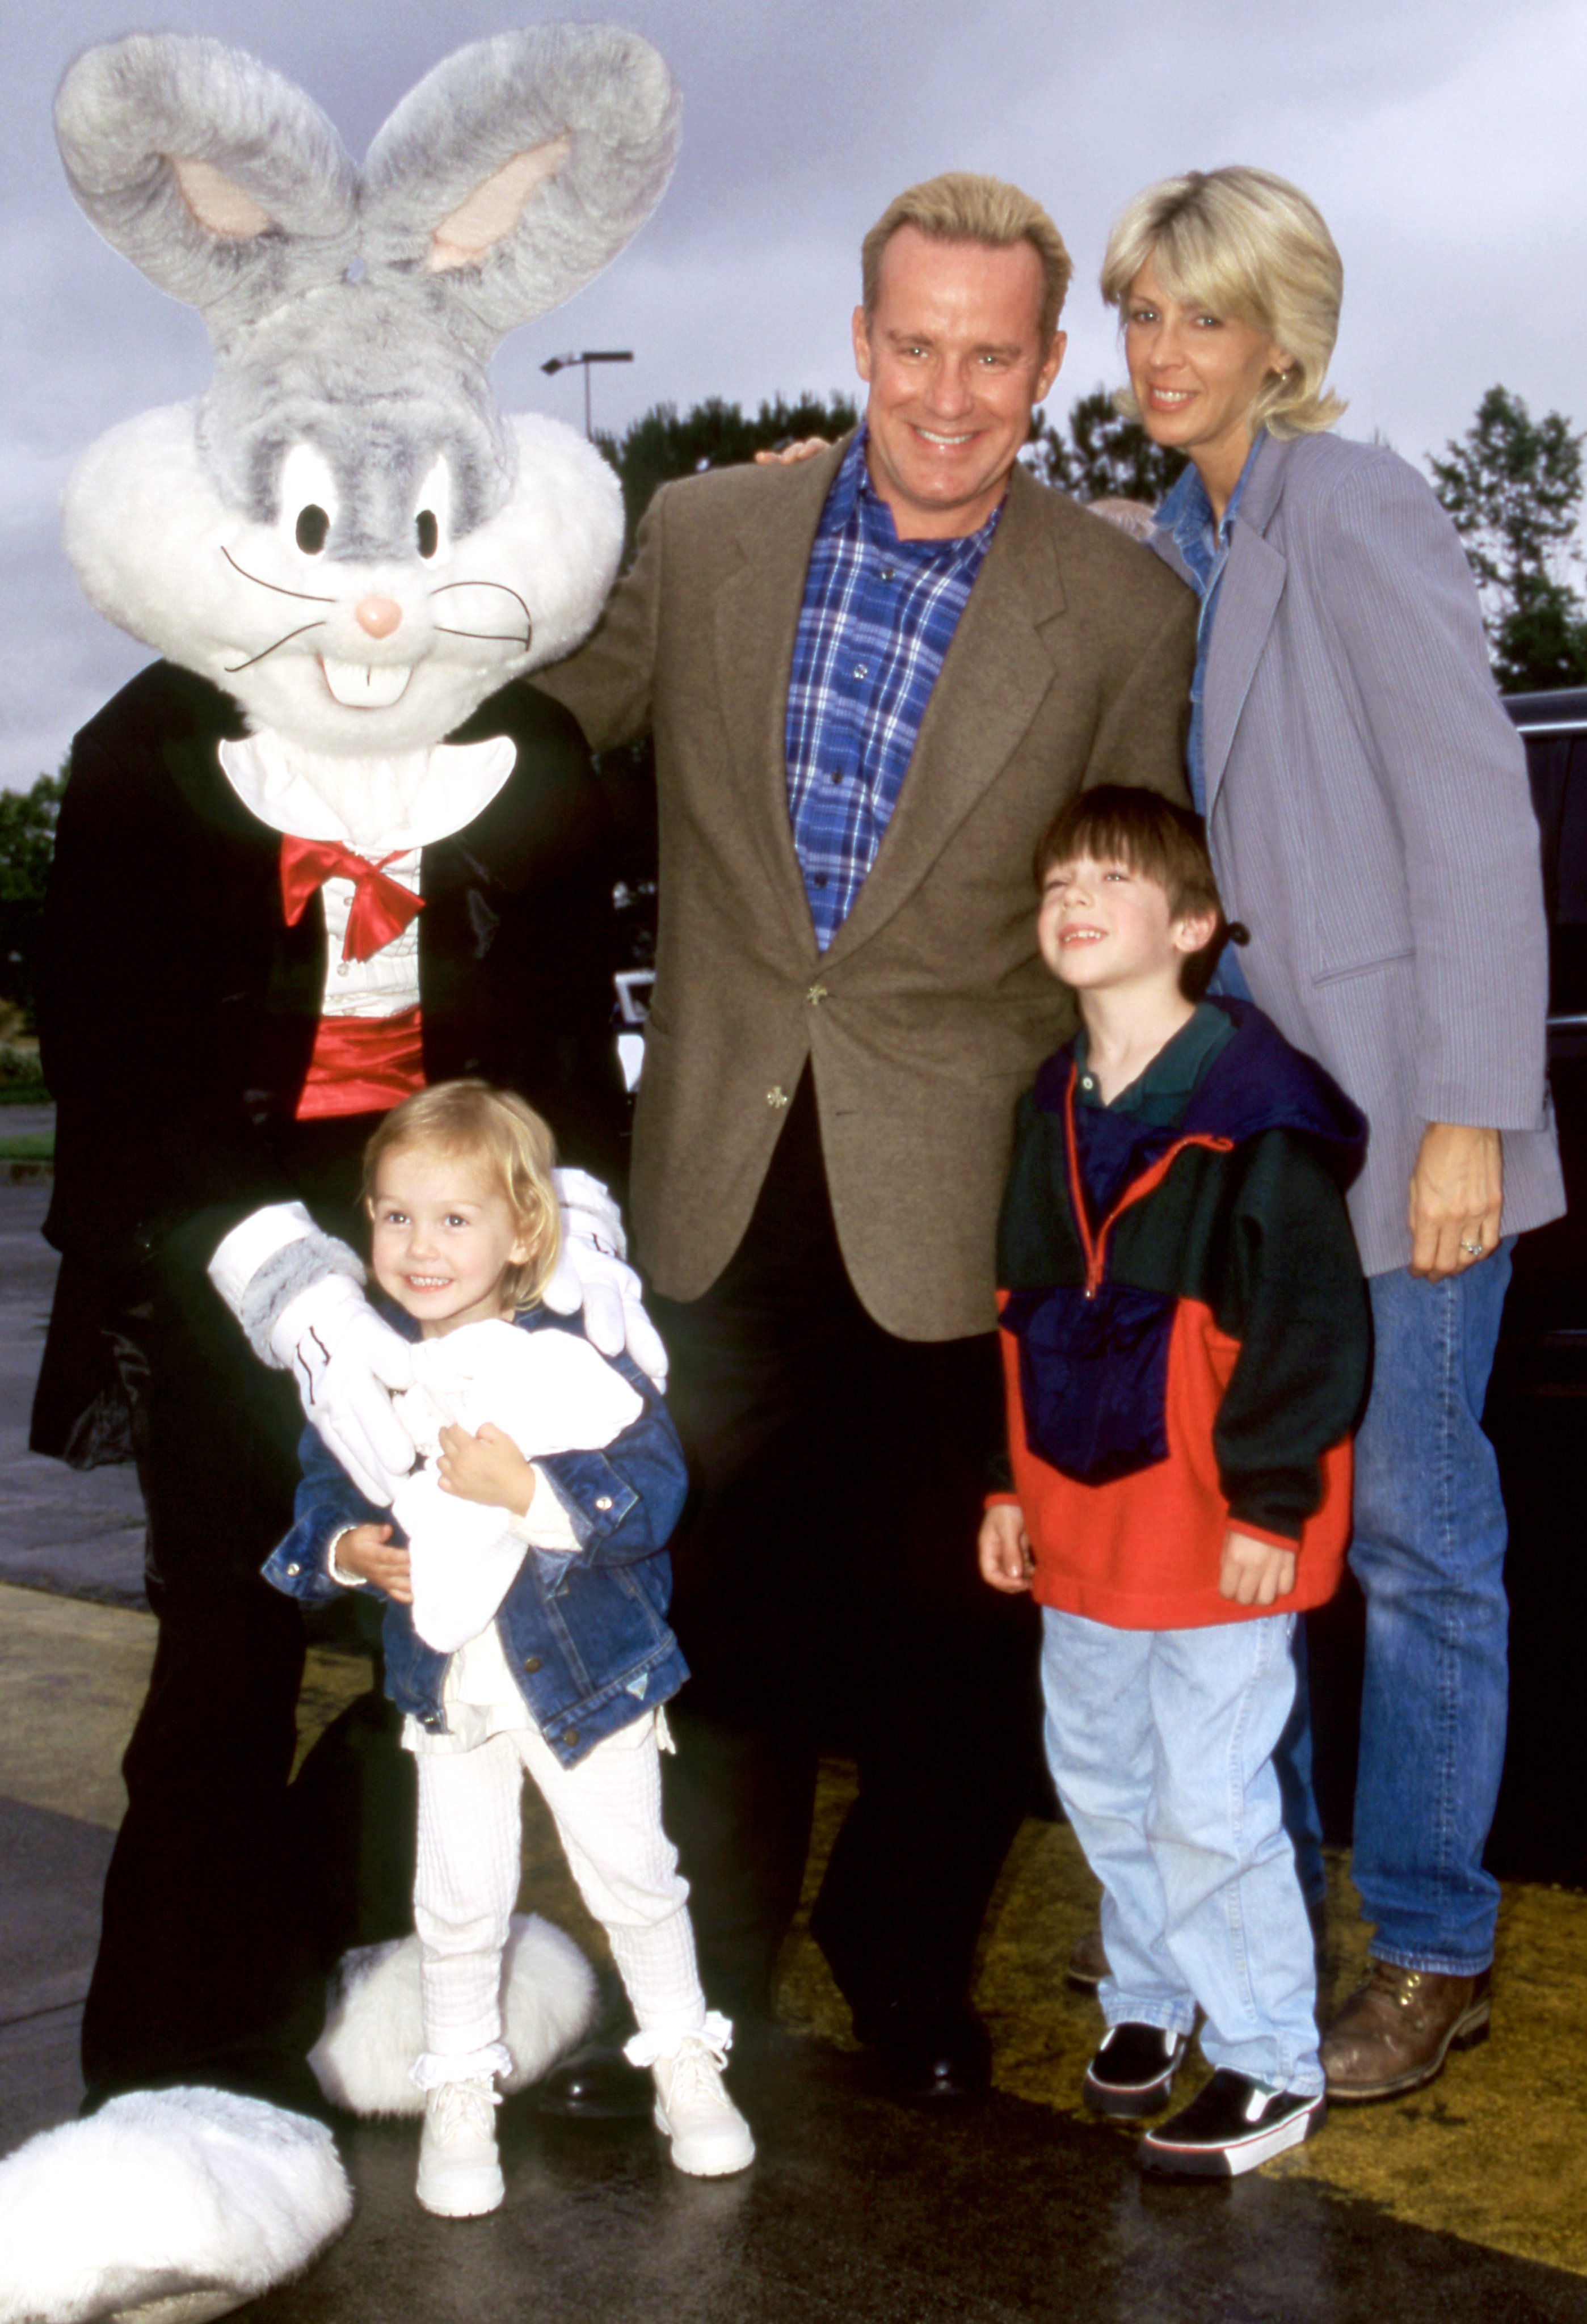  Phil Hartman his wife Brynn, his daughter and son, Birgen and Sean, pose for a portrait with Bugs Bunny during an event at Six Flags Magic Mountain in June 1995, in Valencia, California | Source: Getty Images